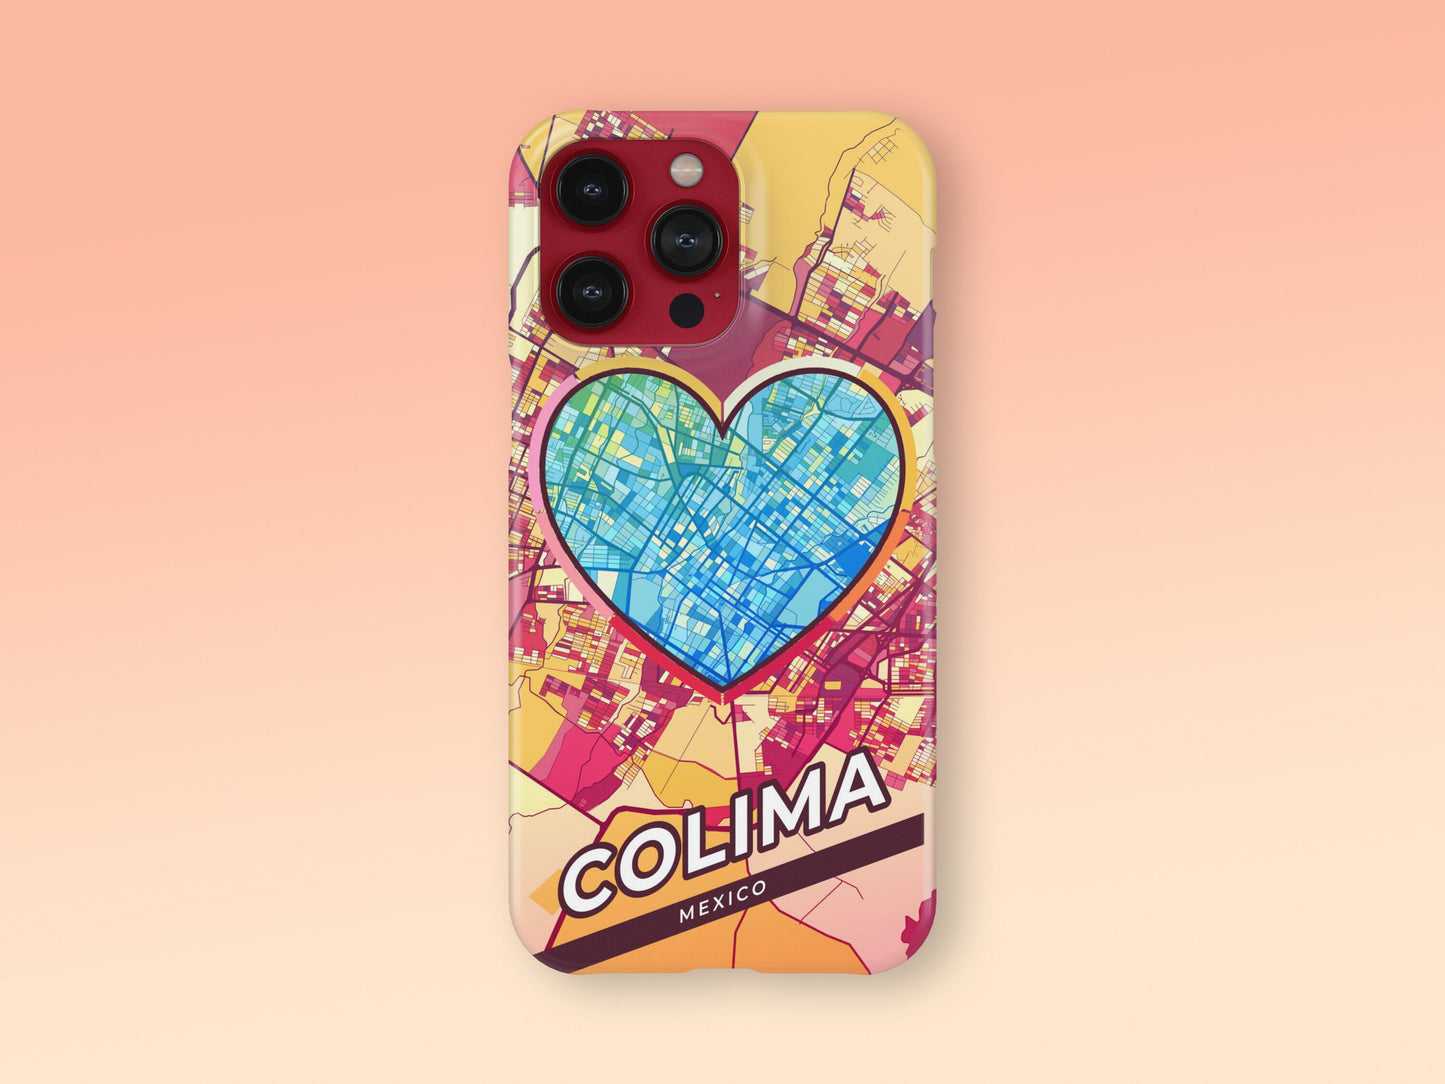 Colima Mexico slim phone case with colorful icon. Birthday, wedding or housewarming gift. Couple match cases. 2